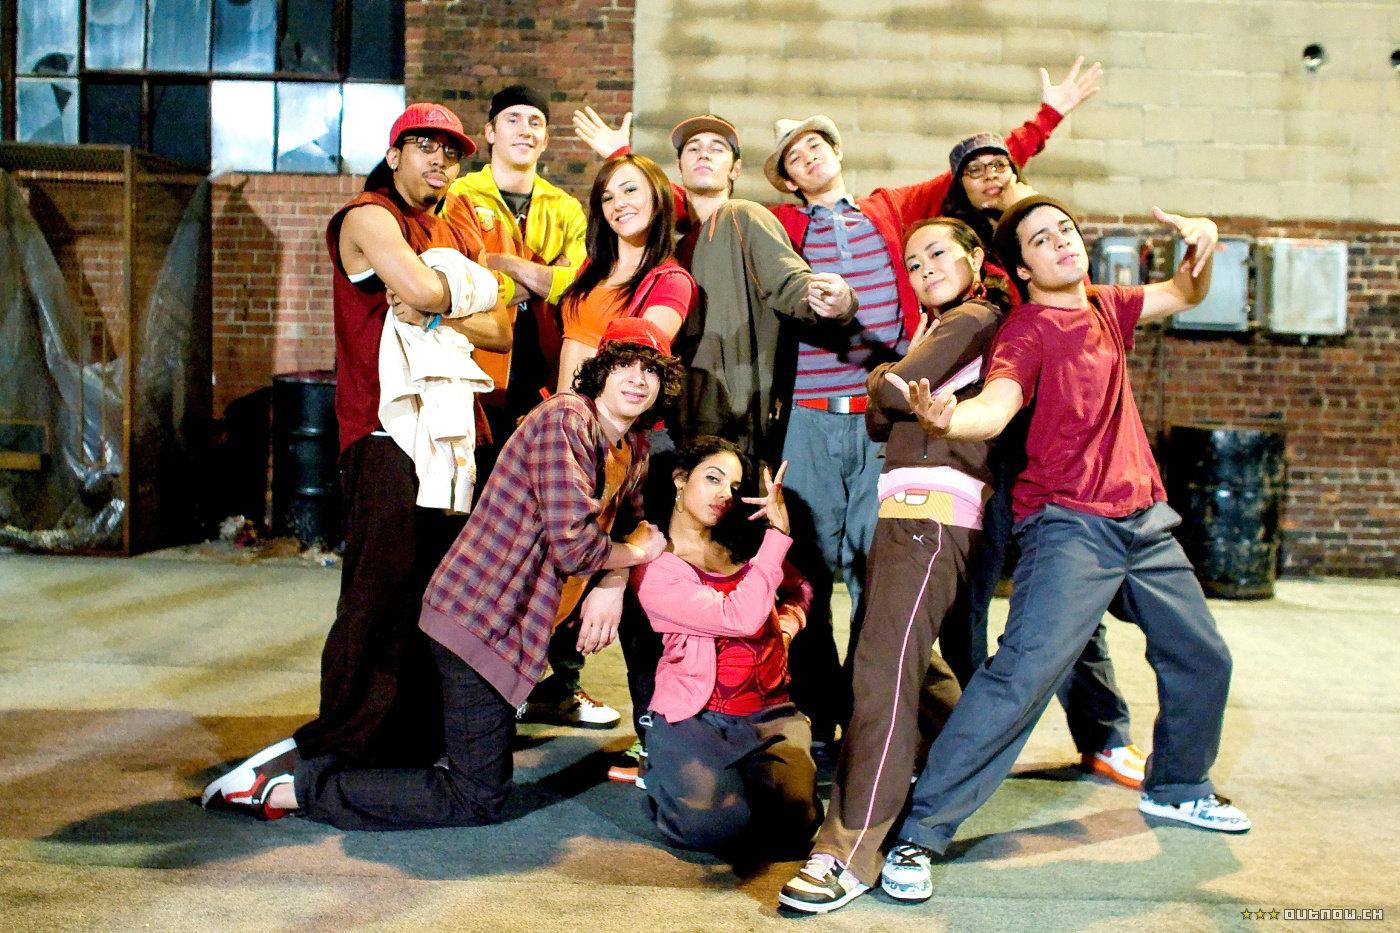 Step Up 2 The Streets image Cast HD wallpaper and background photo